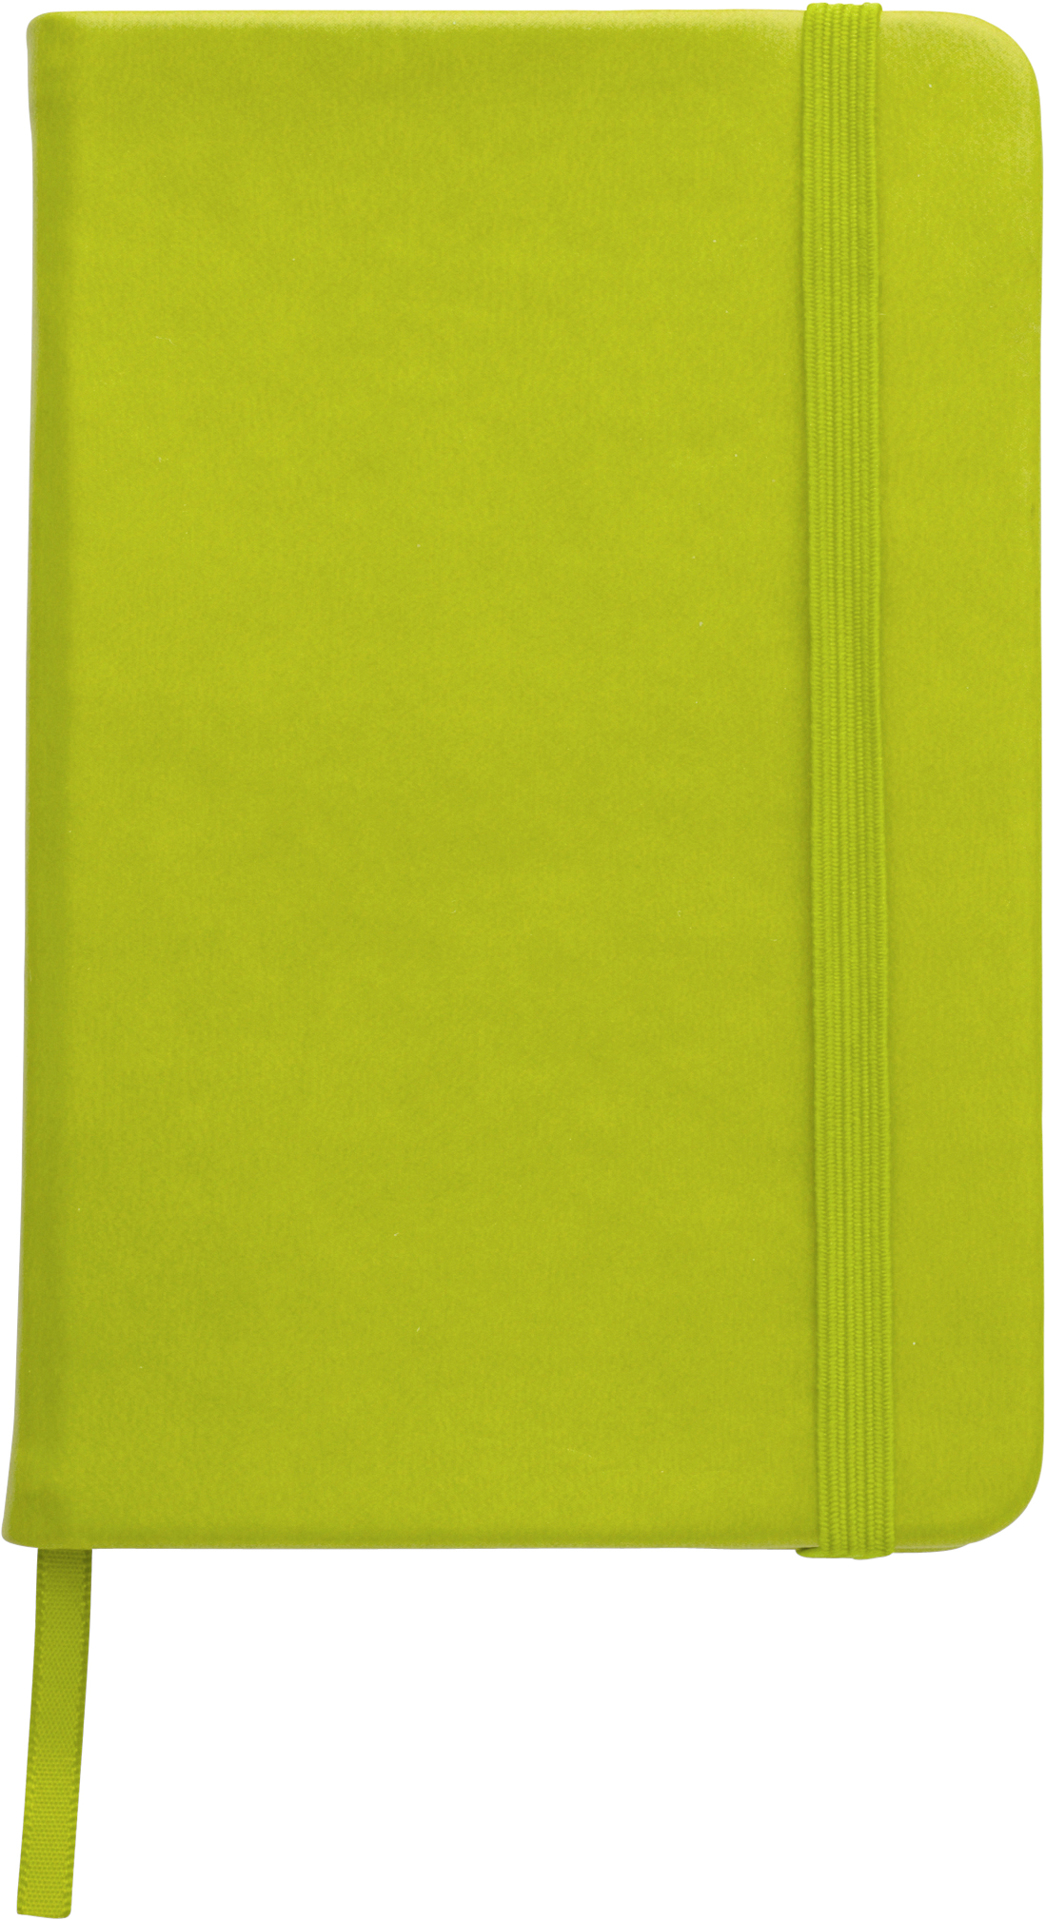 A6 Notebook with soft PU cover in lime green